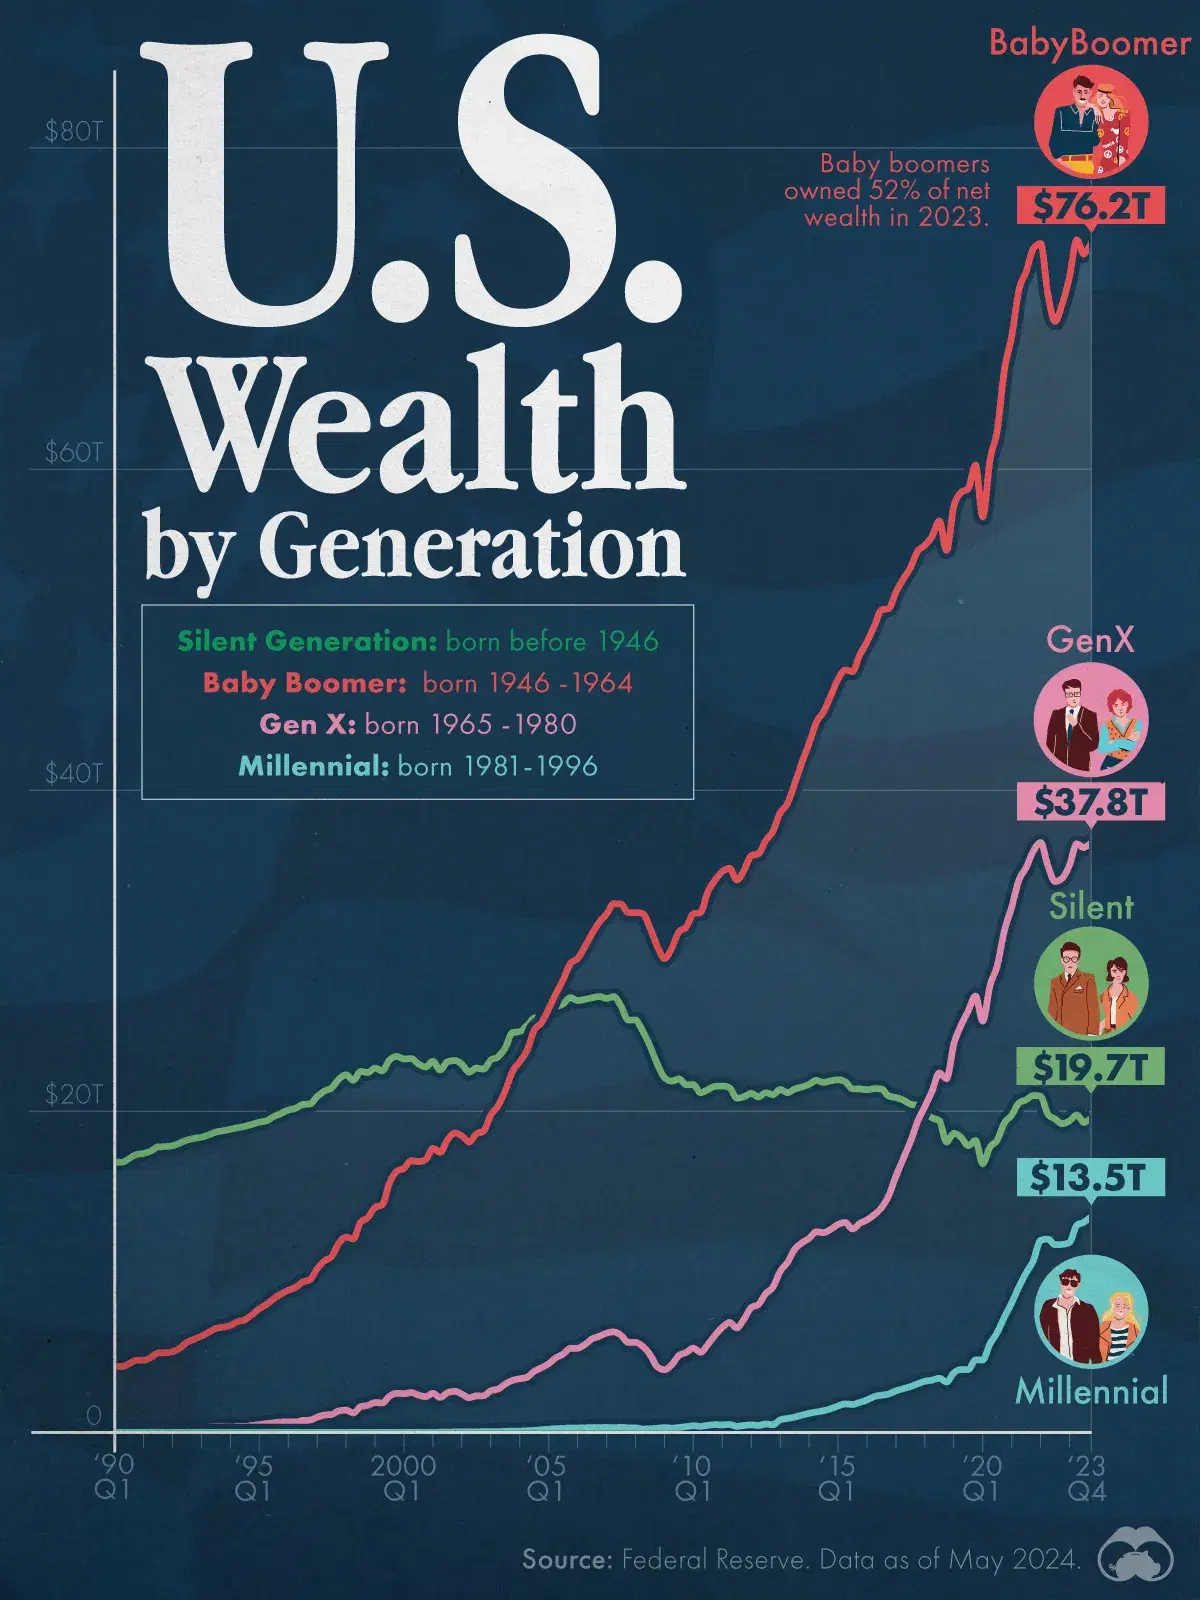 Baby Boomers Own Over Half of the Wealth in America